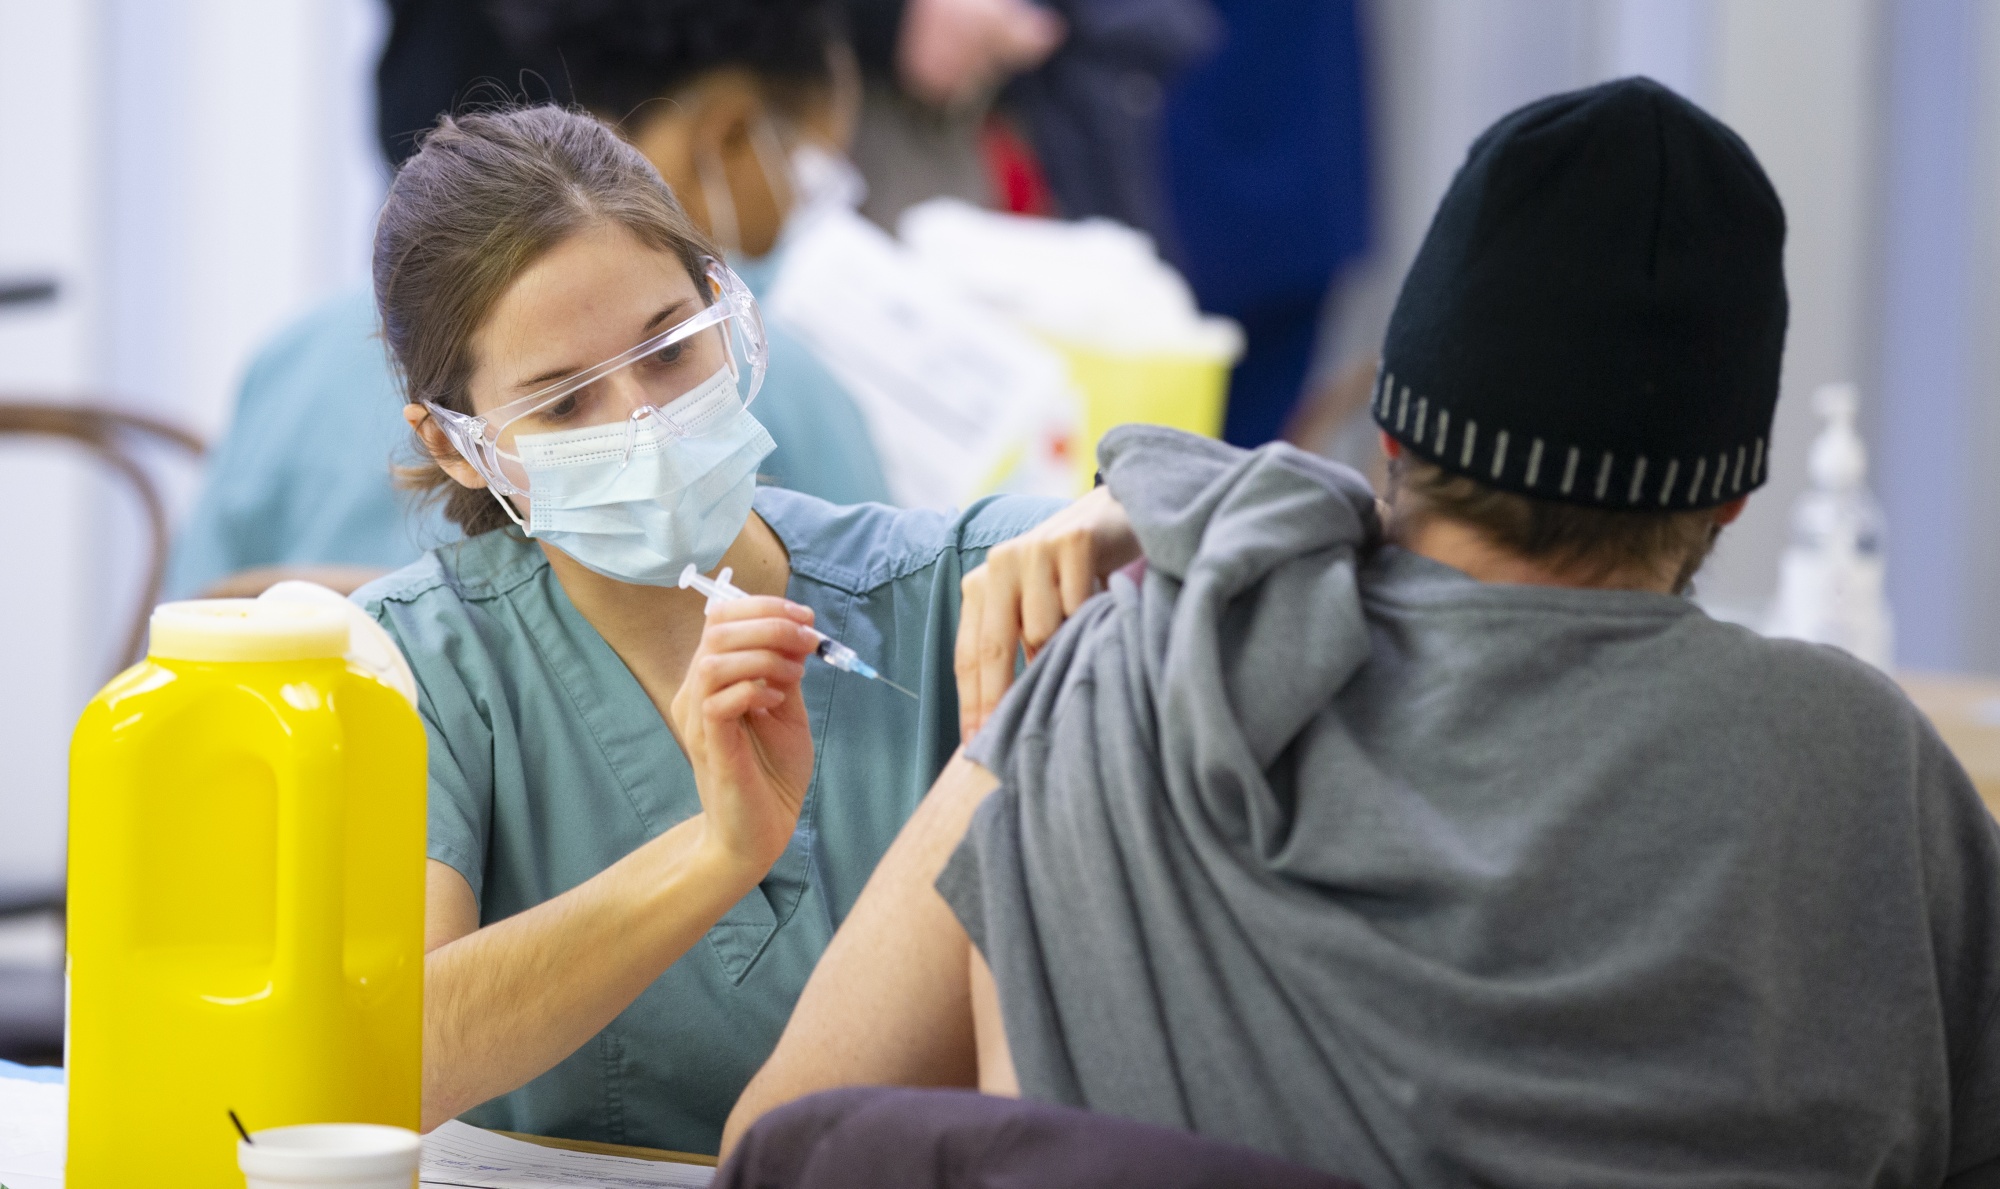 A healthcare worker administers a dose of Covid-19 vaccine at a Montreal homeless shelter on Jan. 25.